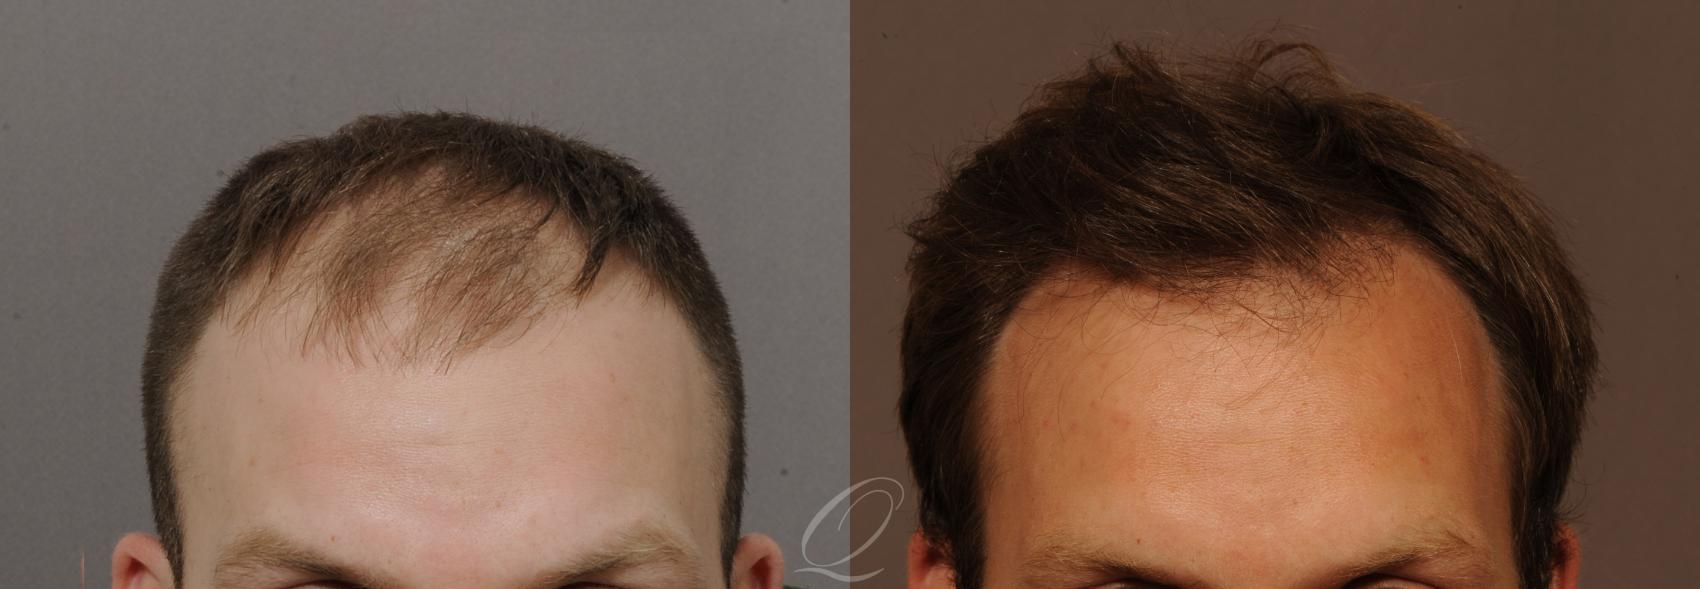 FUT Case 1120 Before & After View #1 | Rochester, Buffalo, & Syracuse, NY | Quatela Center for Hair Restoration